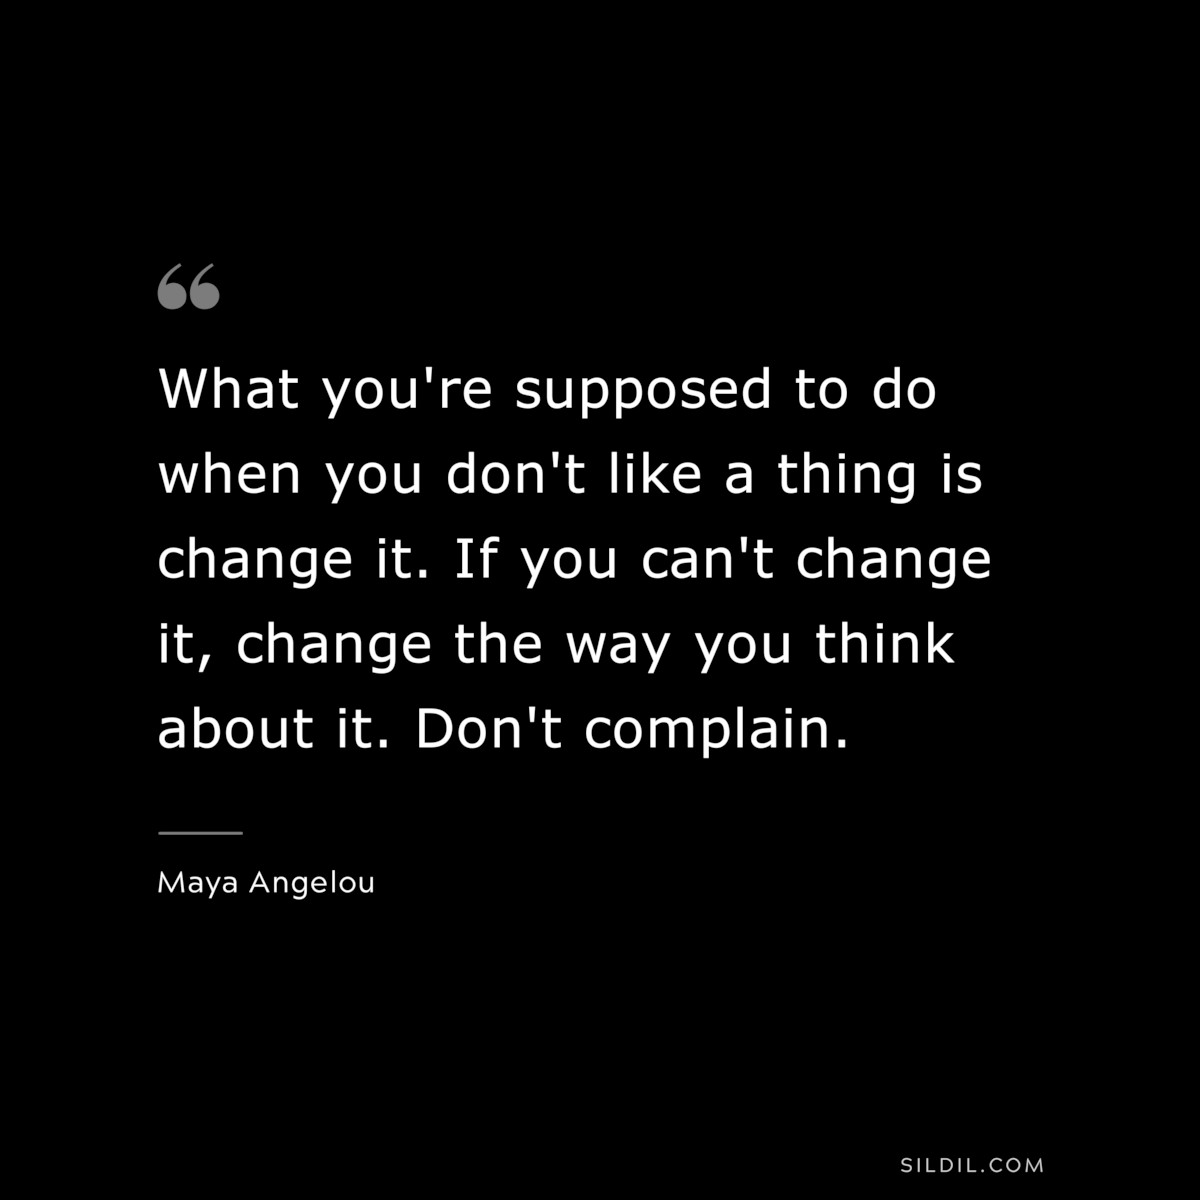 What you're supposed to do when you don't like a thing is change it. If you can't change it, change the way you think about it. Don't complain. ― Maya Angelou